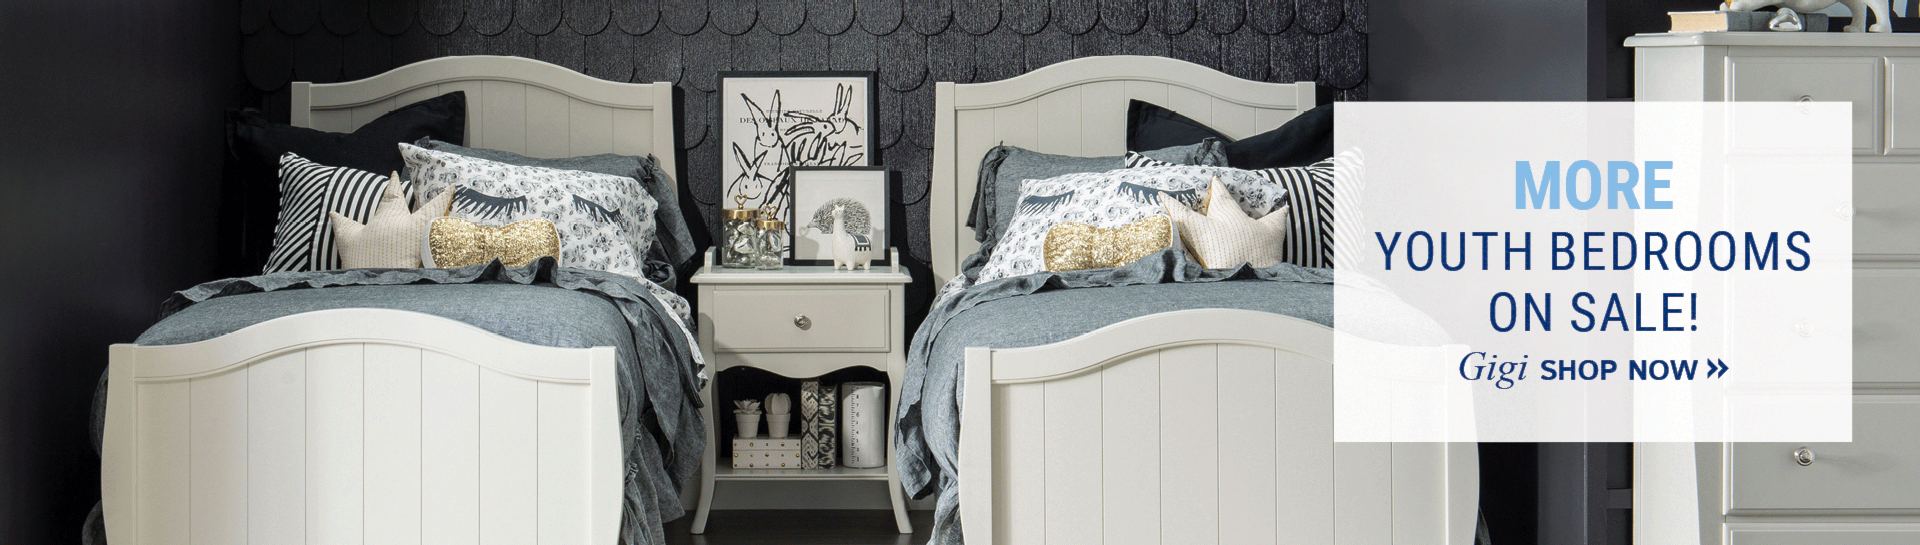 MORE Youth Bedrooms on Sale! Shop Now.